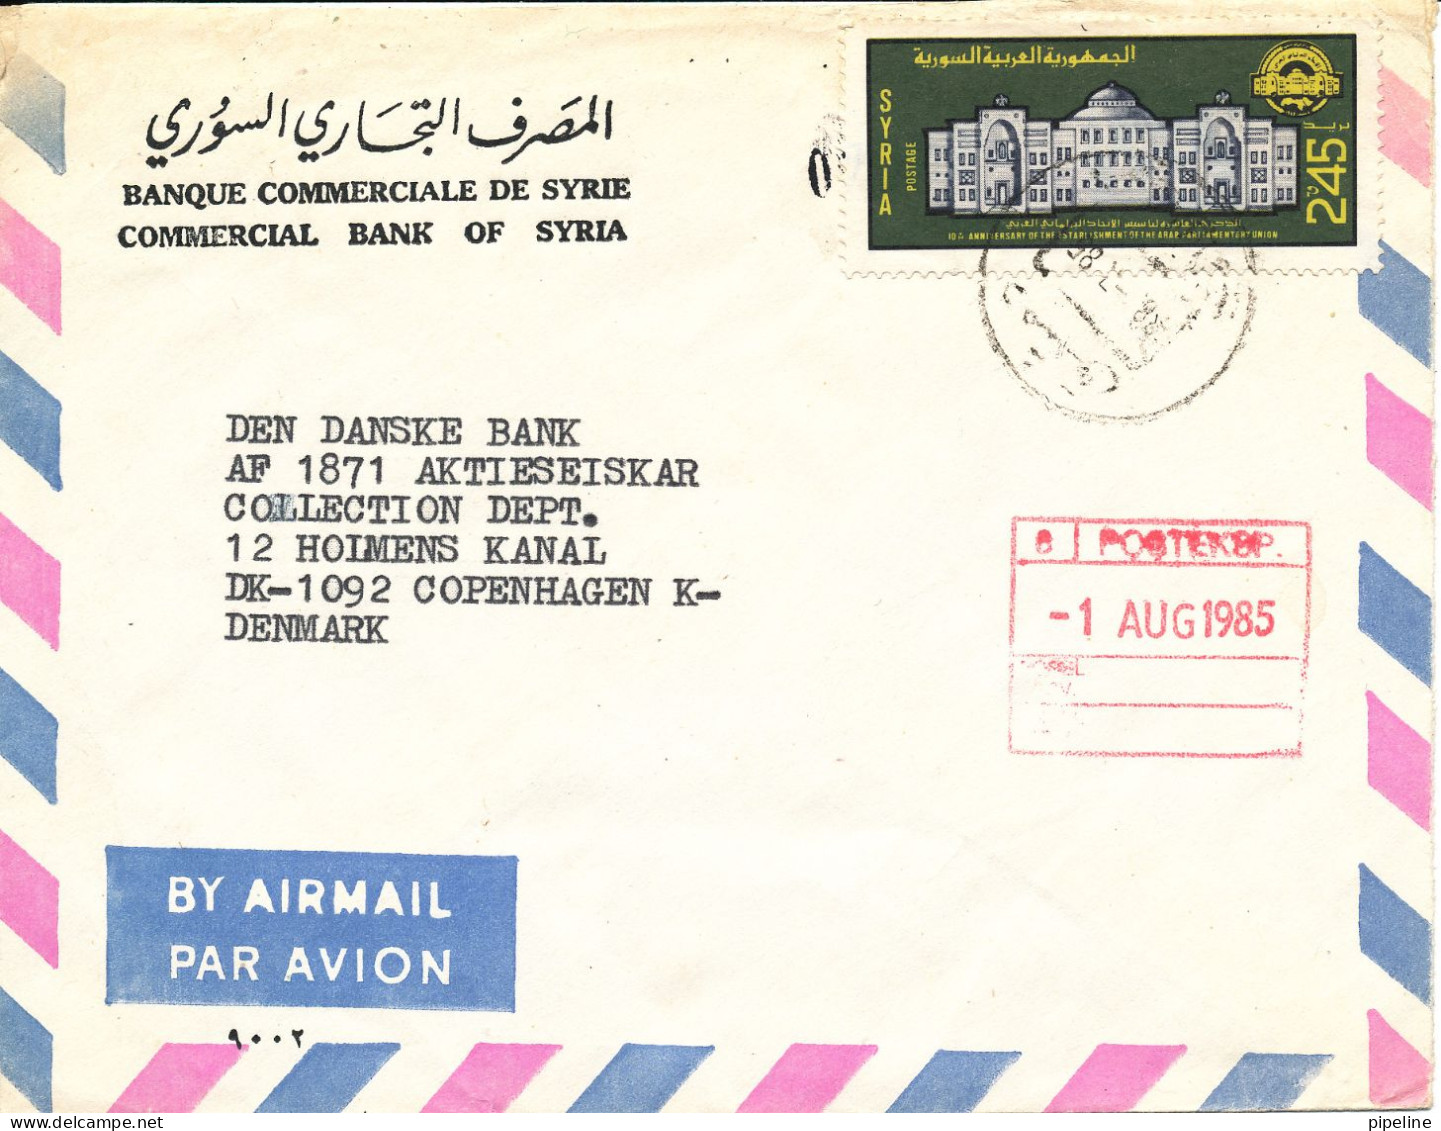 Syria Air Mail Bank Cover Sent To Denmark 28-7-1985 (Commercial Bank Of Syria) - Siria